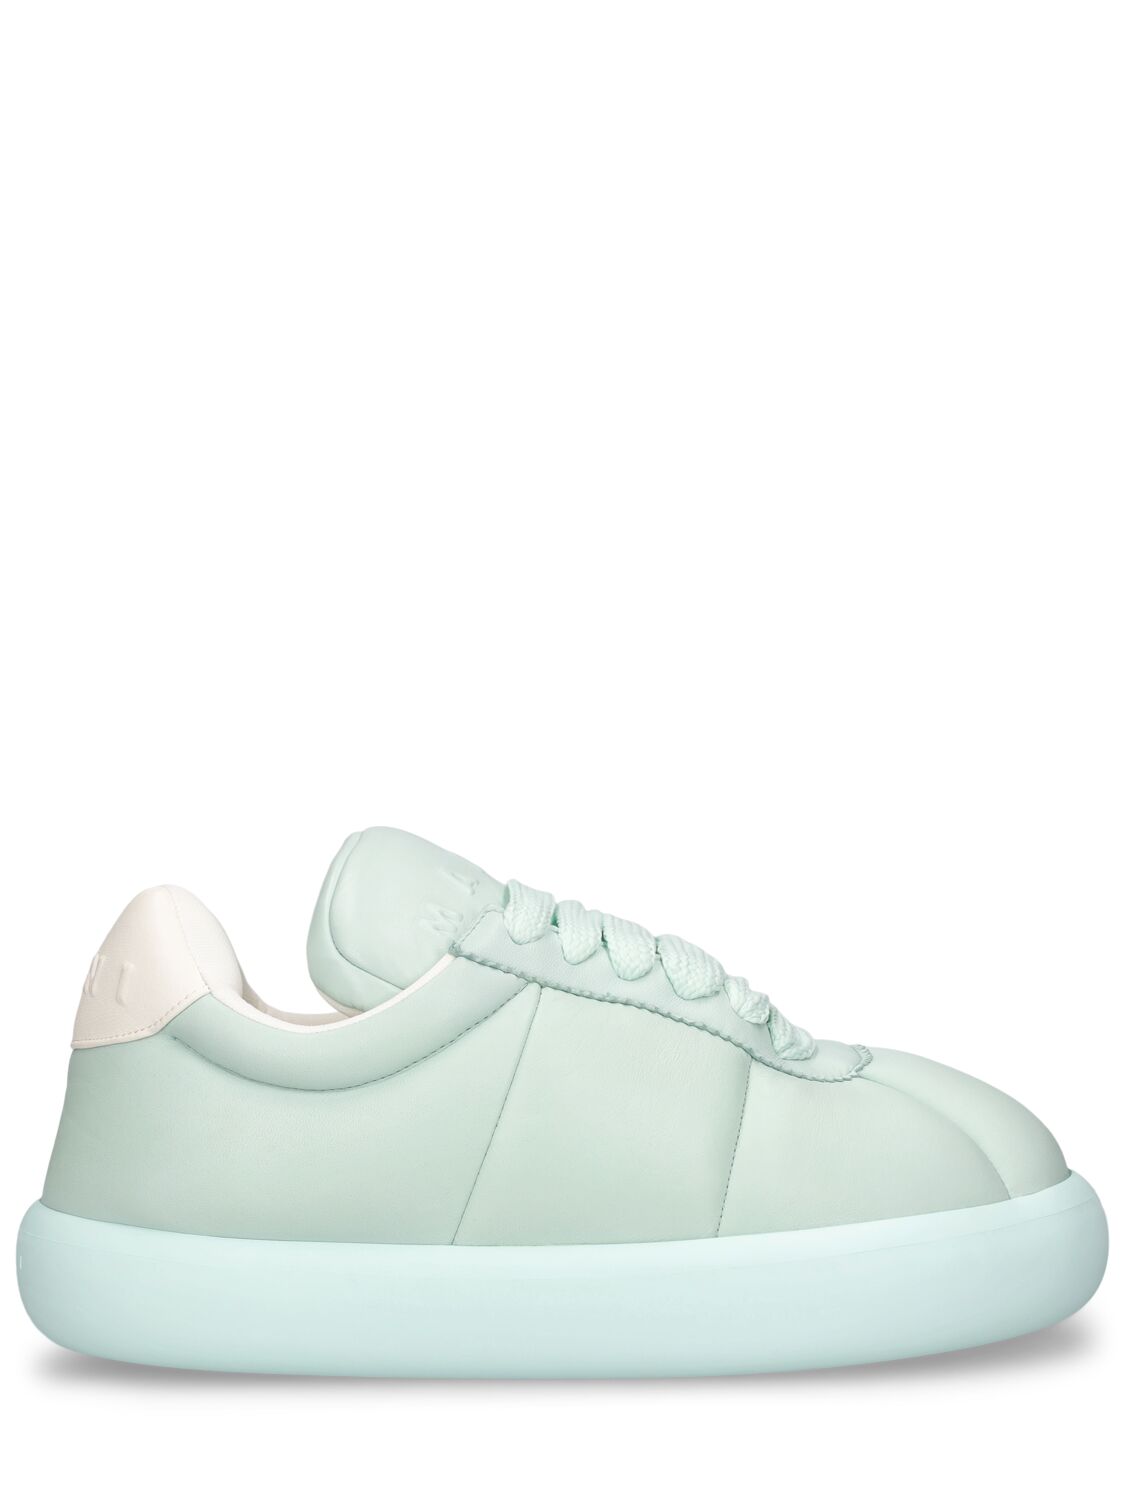 Puffy Soft Leather Low Top Sneakers